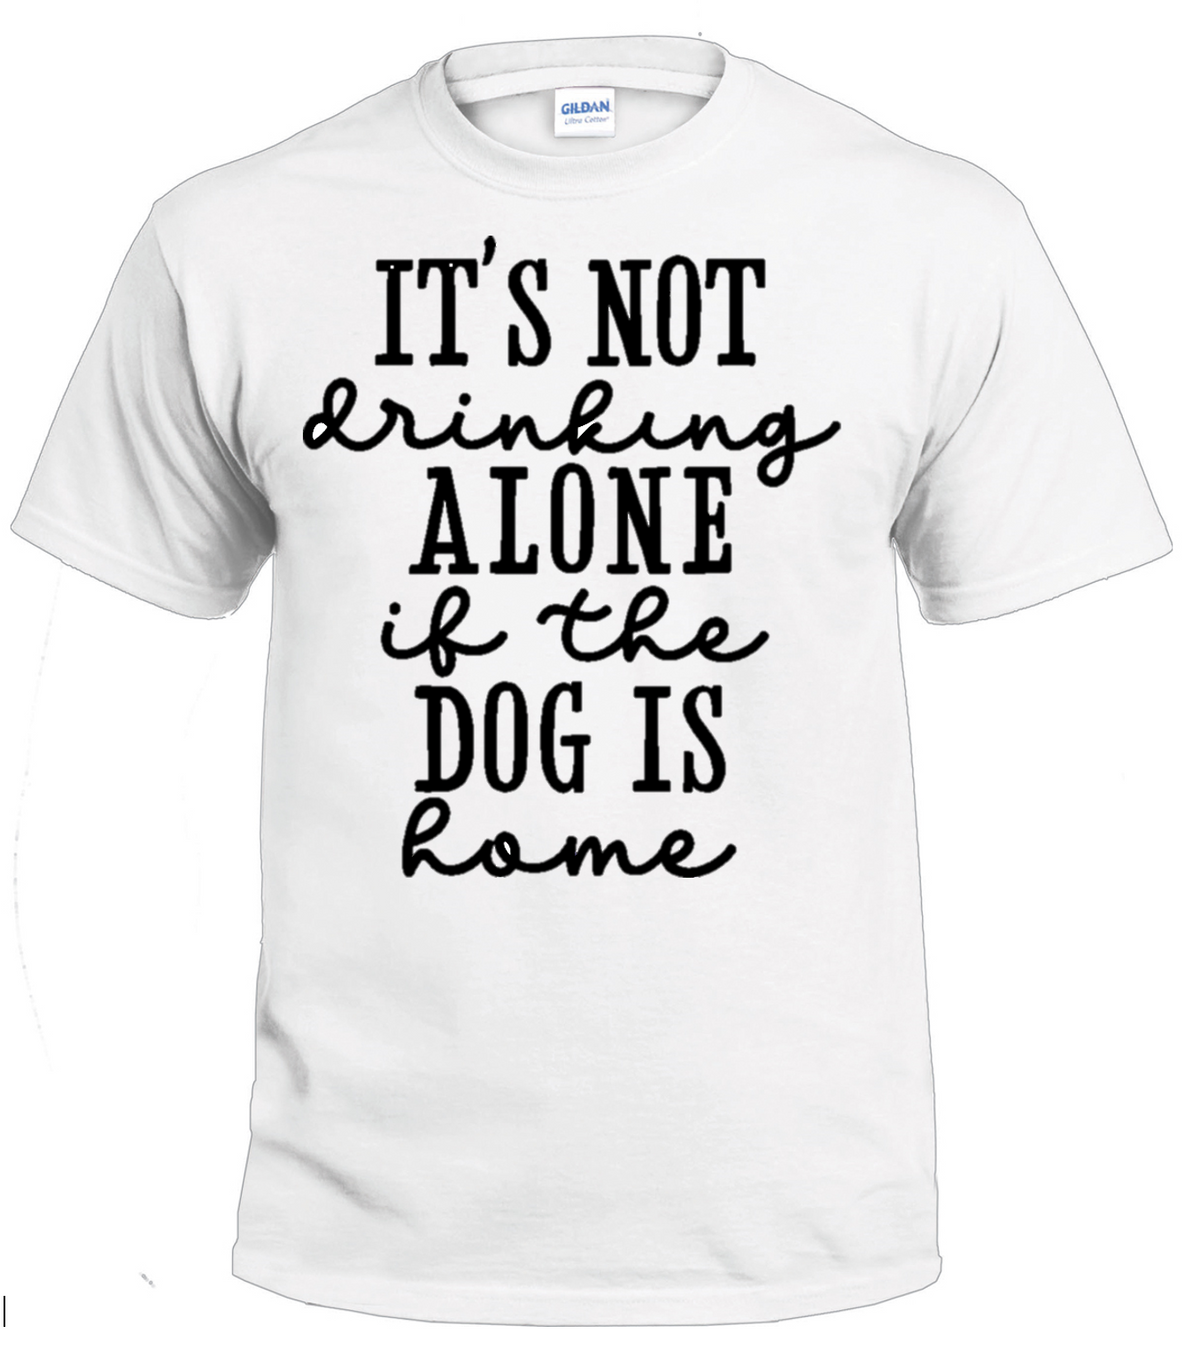 It's Not Drinking Alone if the Dog is Home dog parent t-shirt